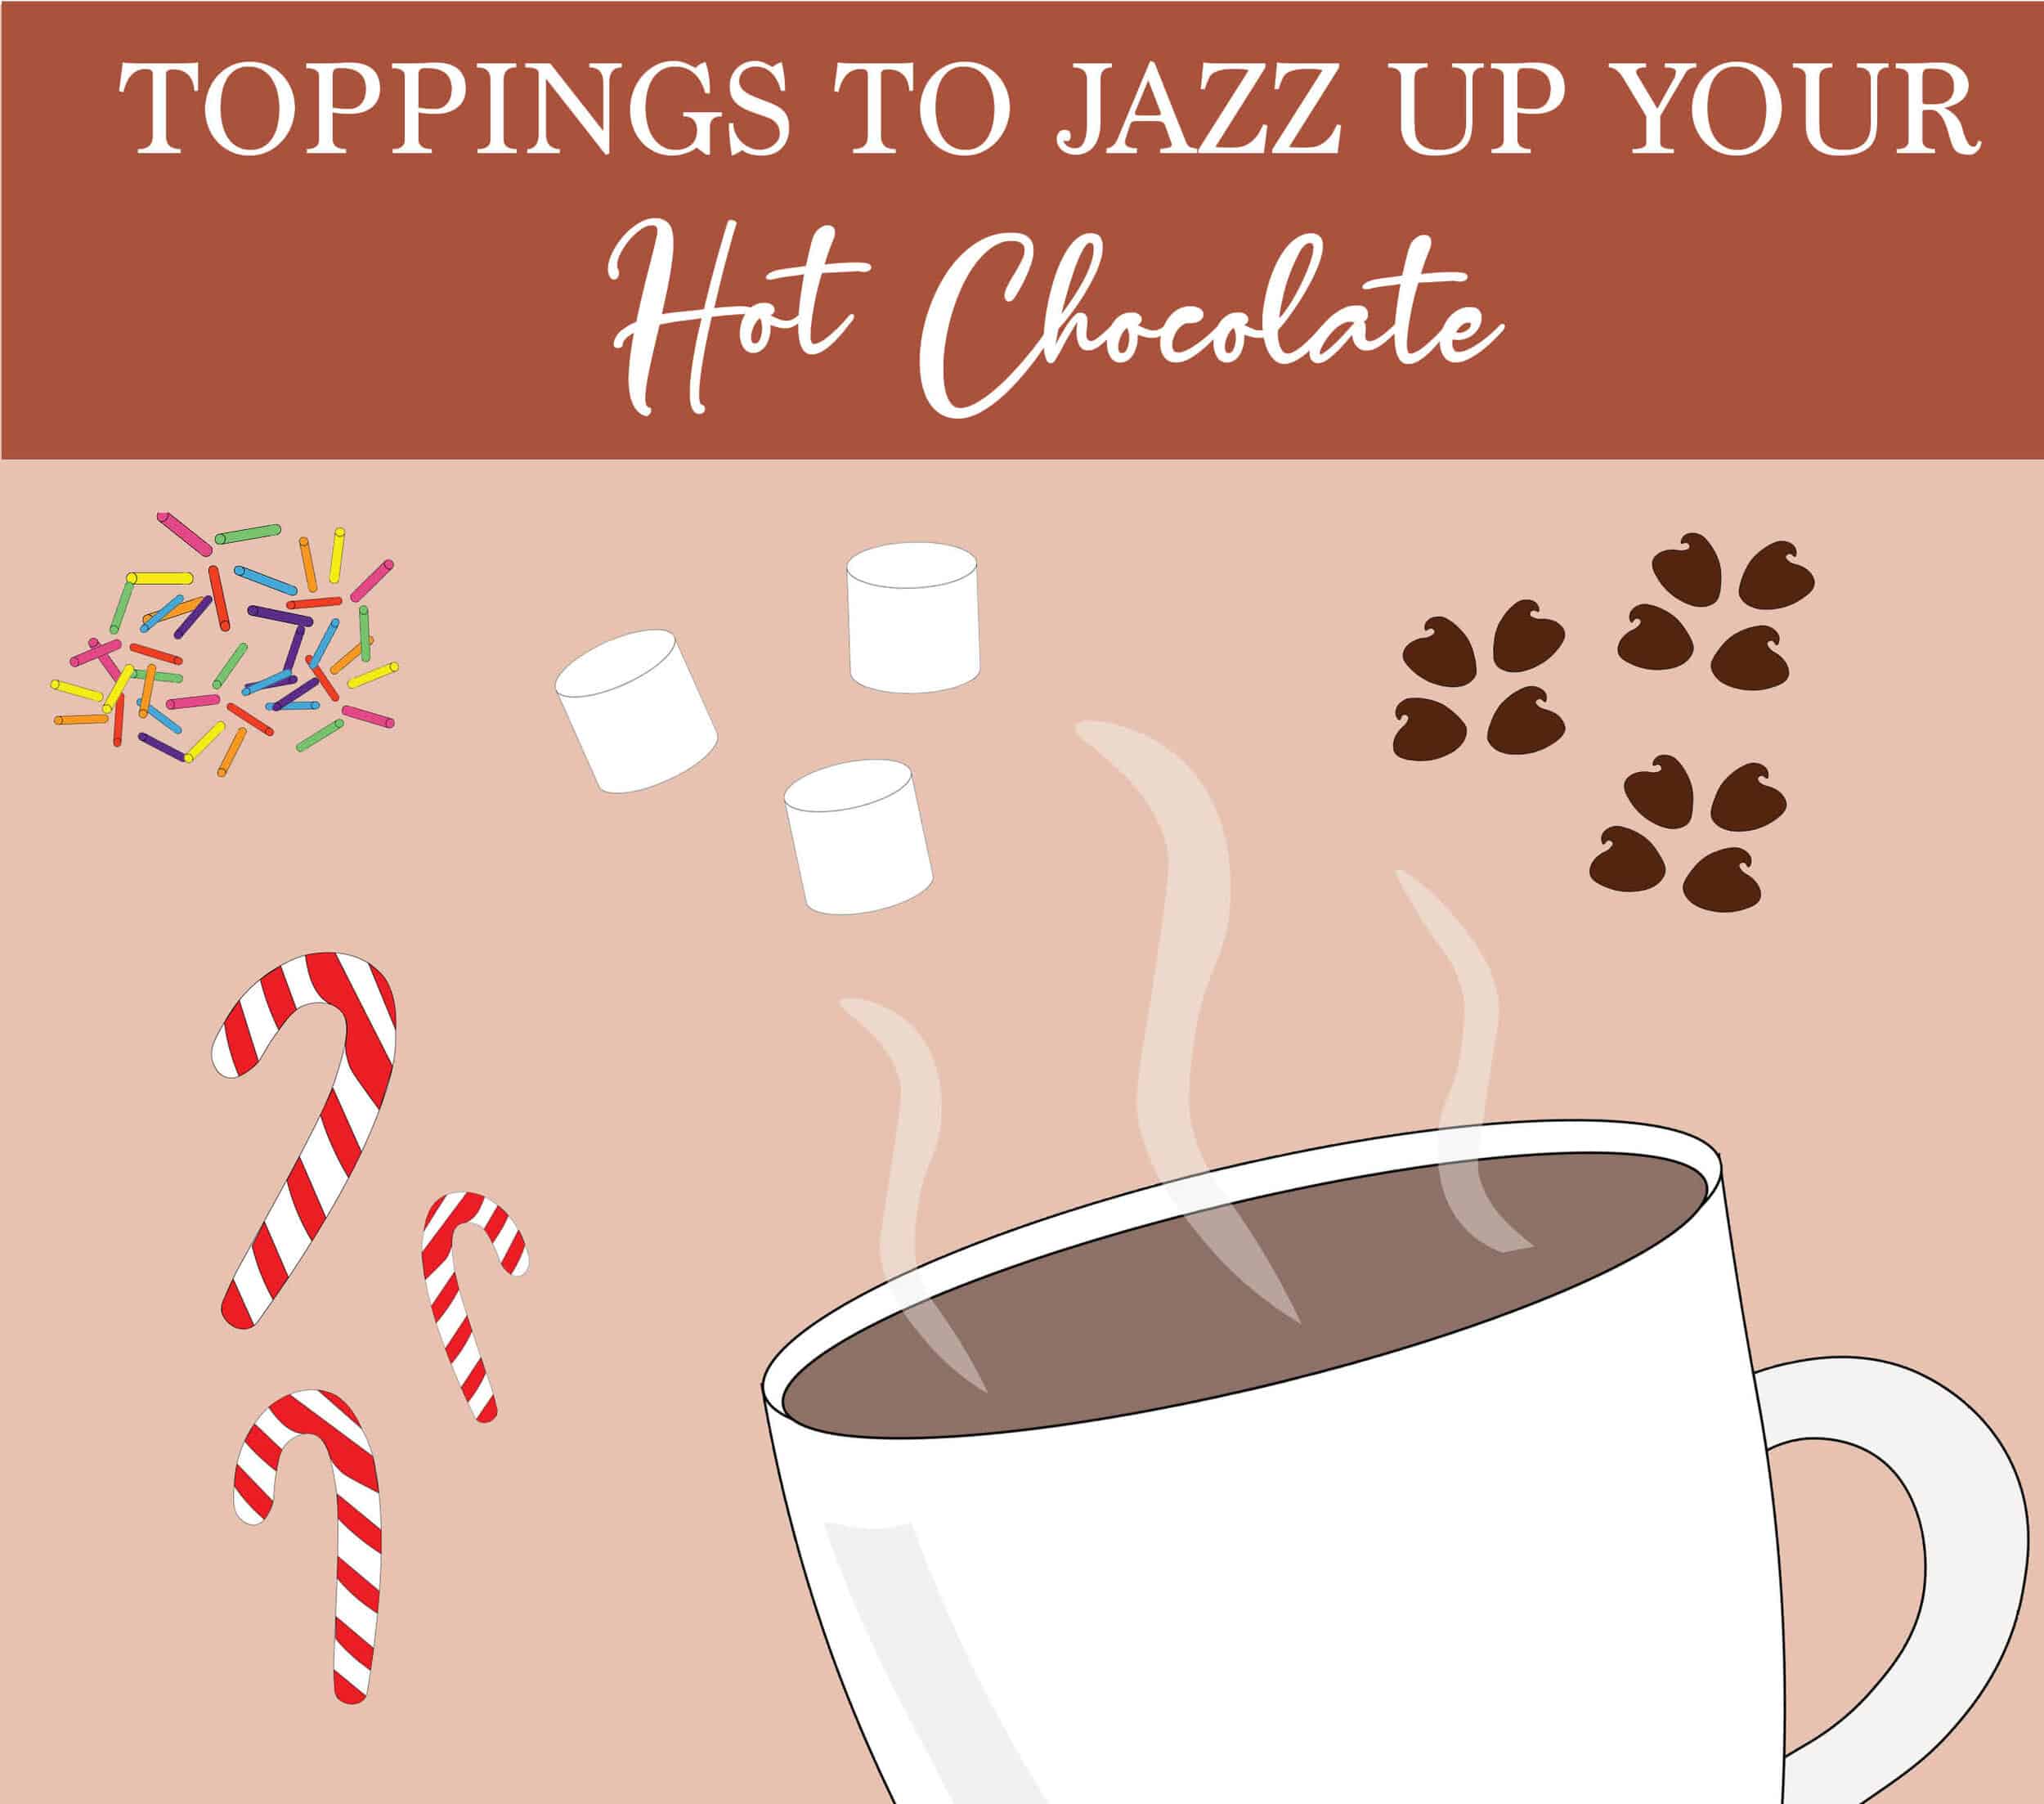 National Hot Chocolate Day is January 31, 2020. Join the celebration and spice up your hot chocolate with these topping suggestions.